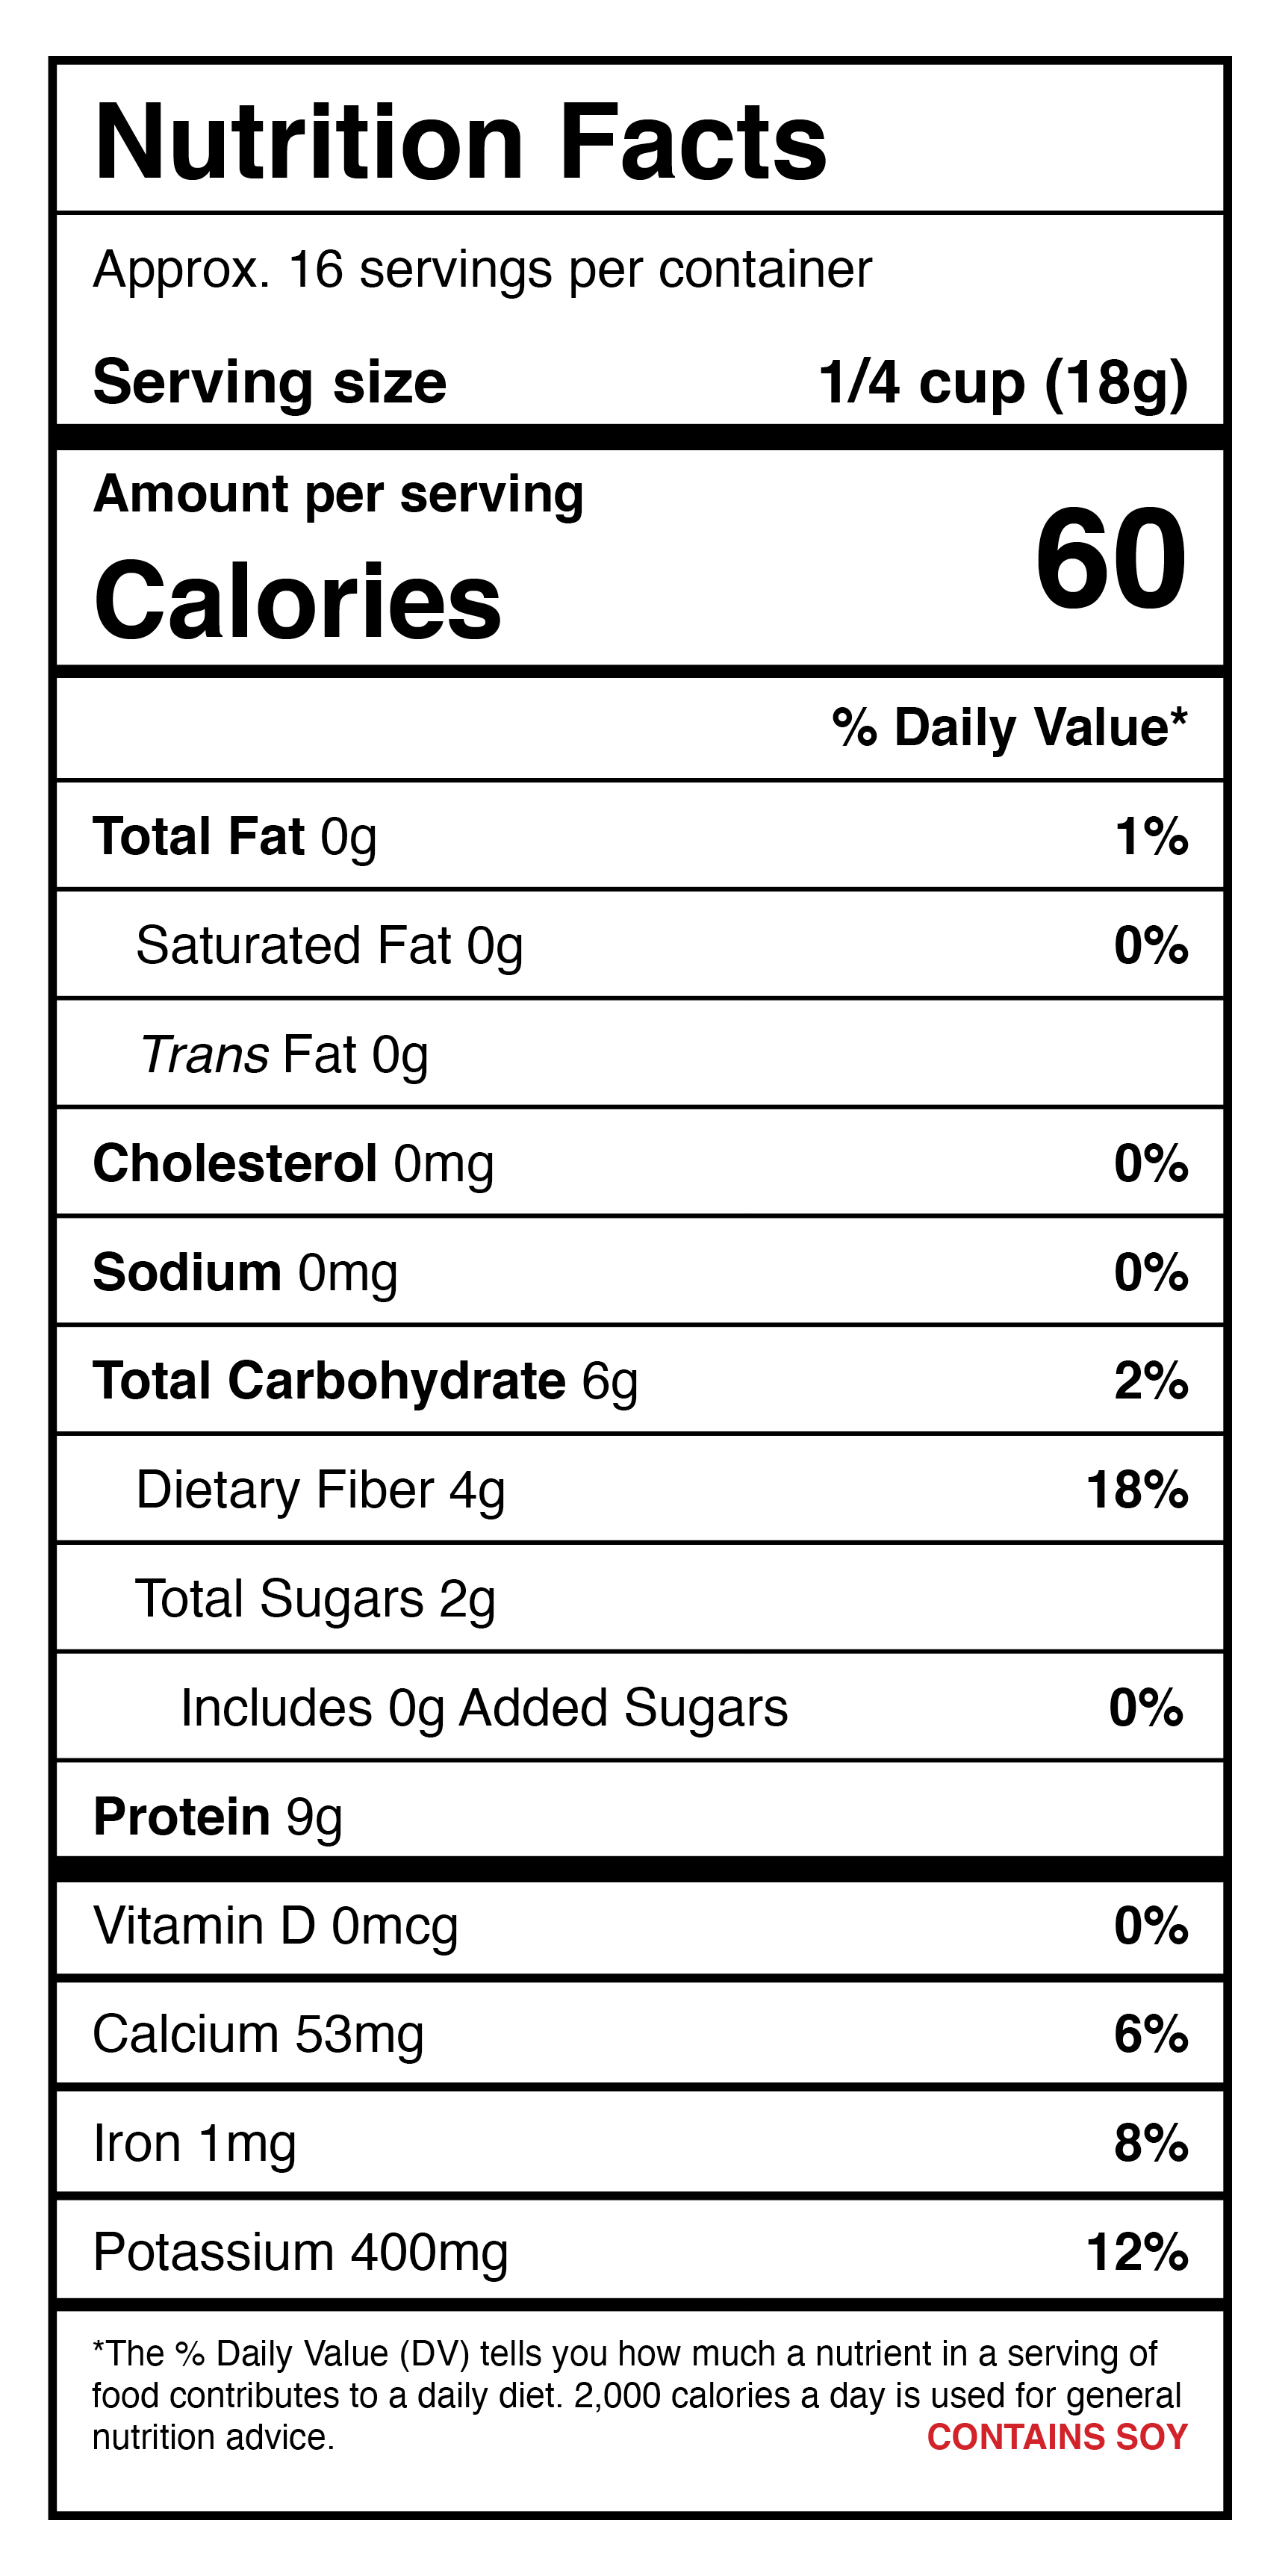 A nutrition label for a protein shake with Harmony House Beef Style Pieces.